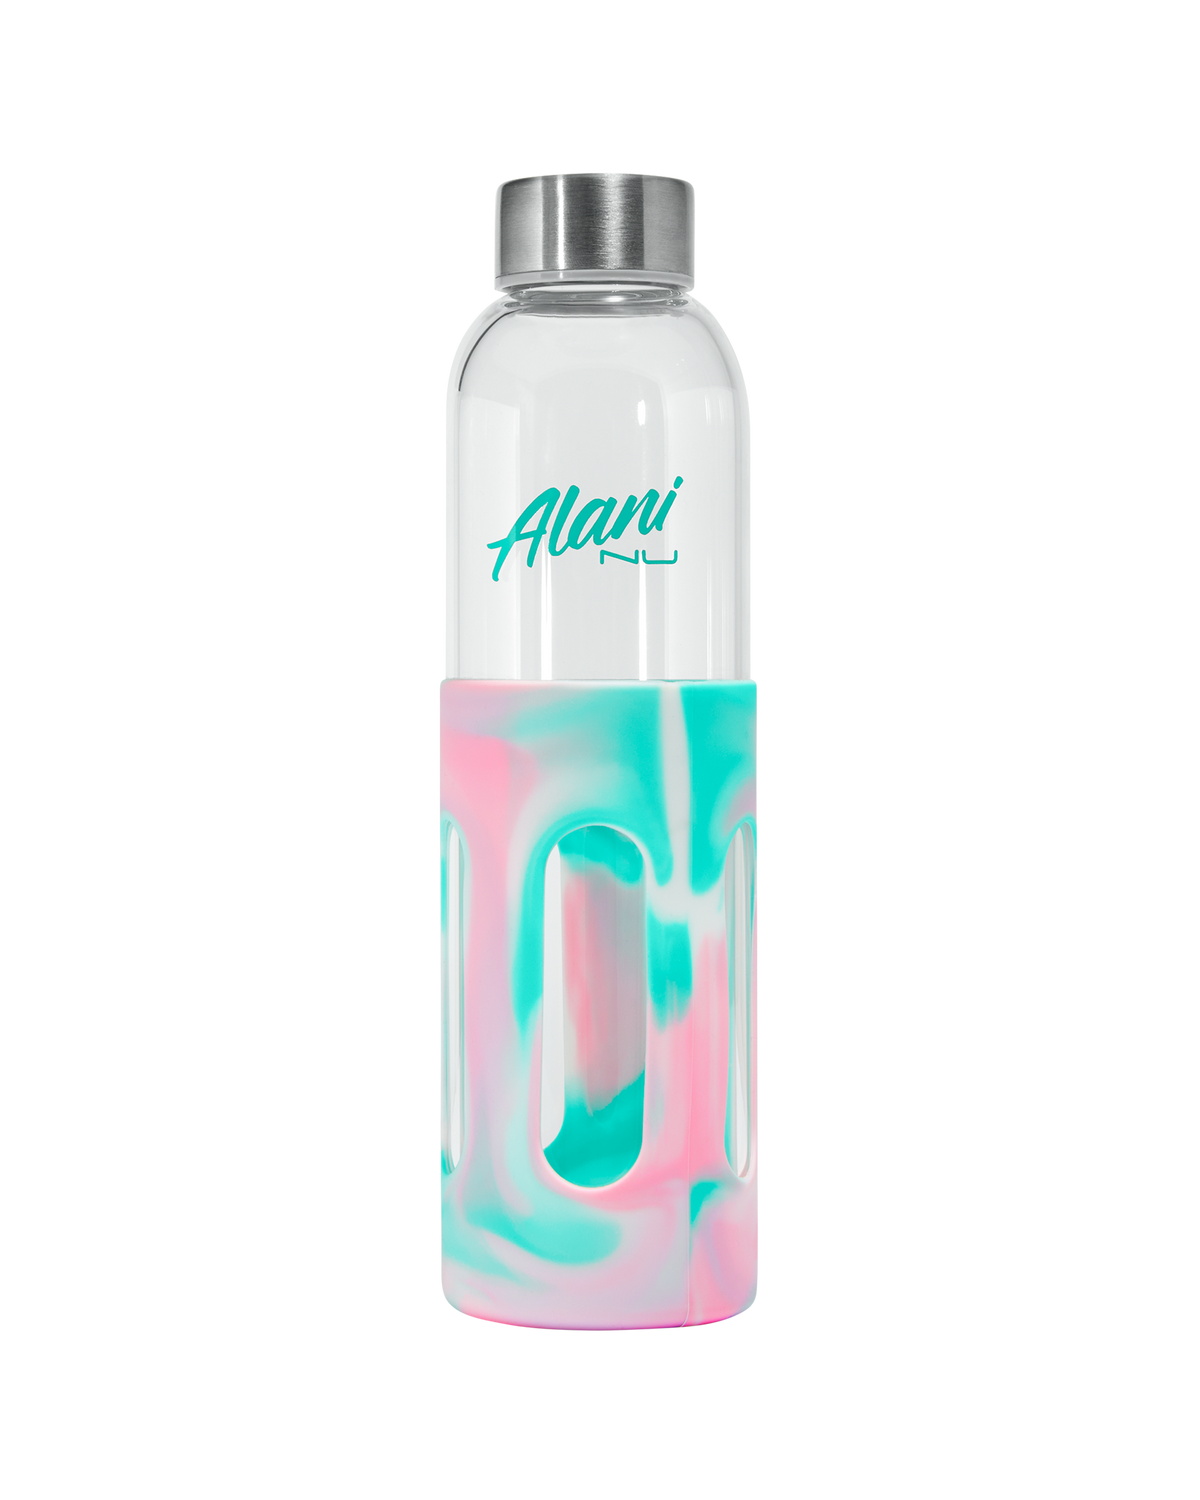 An Alani nu glass water bottle in pink marble color.